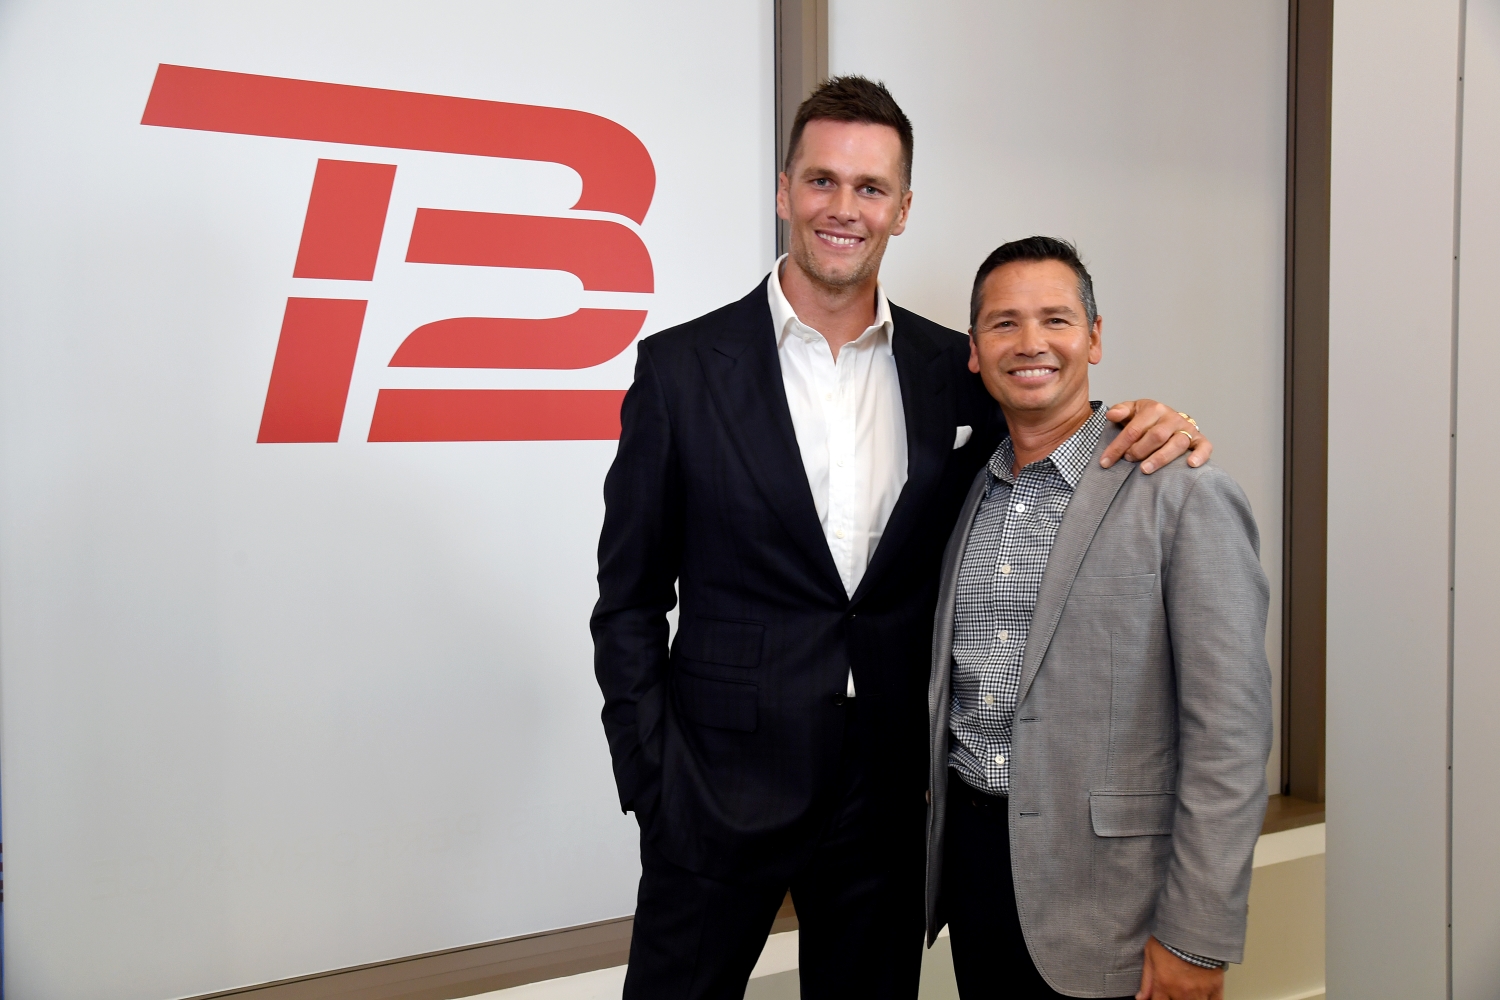 Tom Brady stands next to longtime trainer Alex Guerrero at a TB12 event.